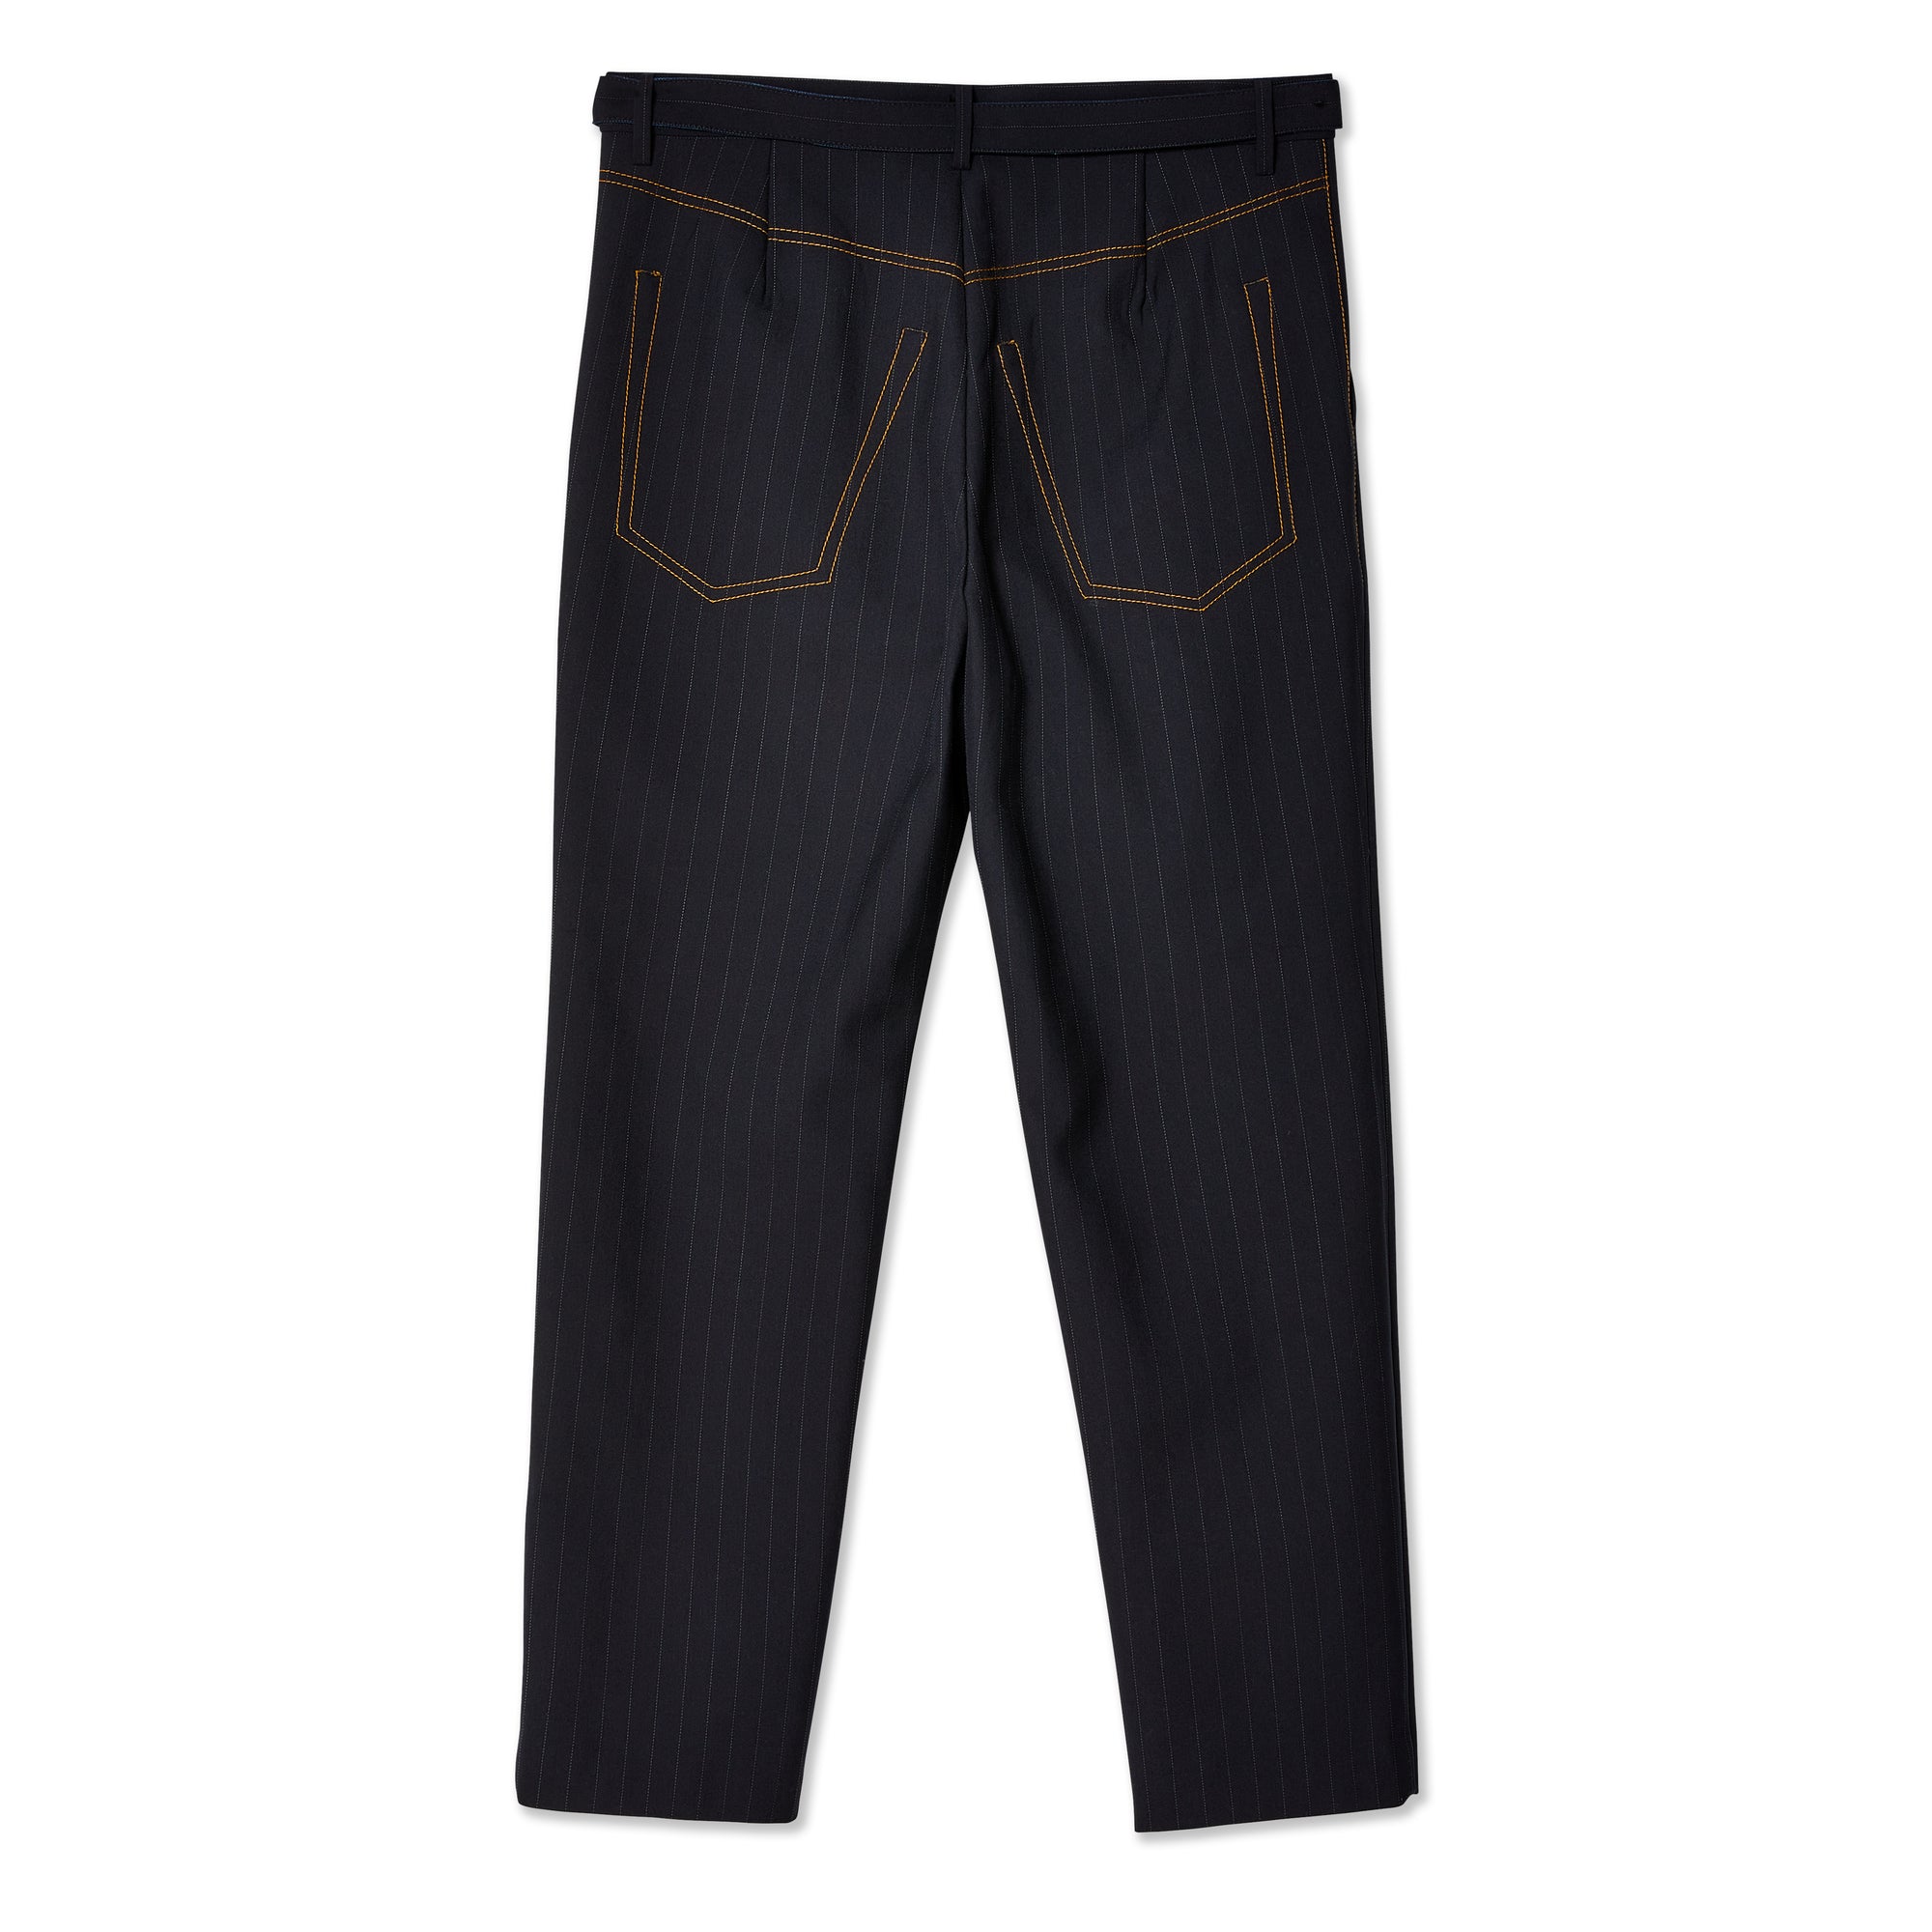 Sacai - Men's Belted Trousers - (Navy) – DSMNY E-SHOP